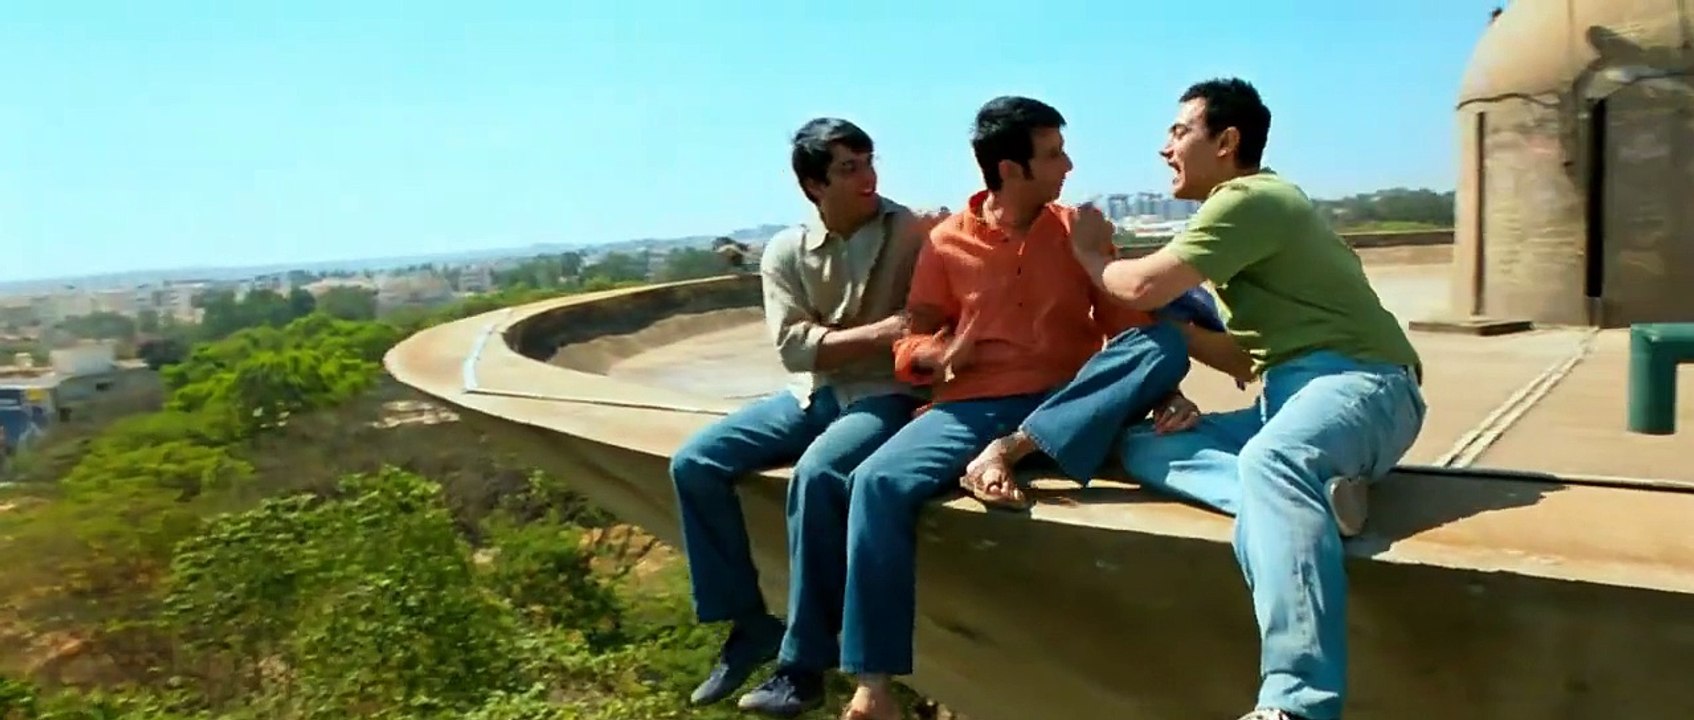 3 Idiots (2009) Full Video Song [HD 720p] by All Video Songs, Full Movies &  Best Scenes - Dailymotion